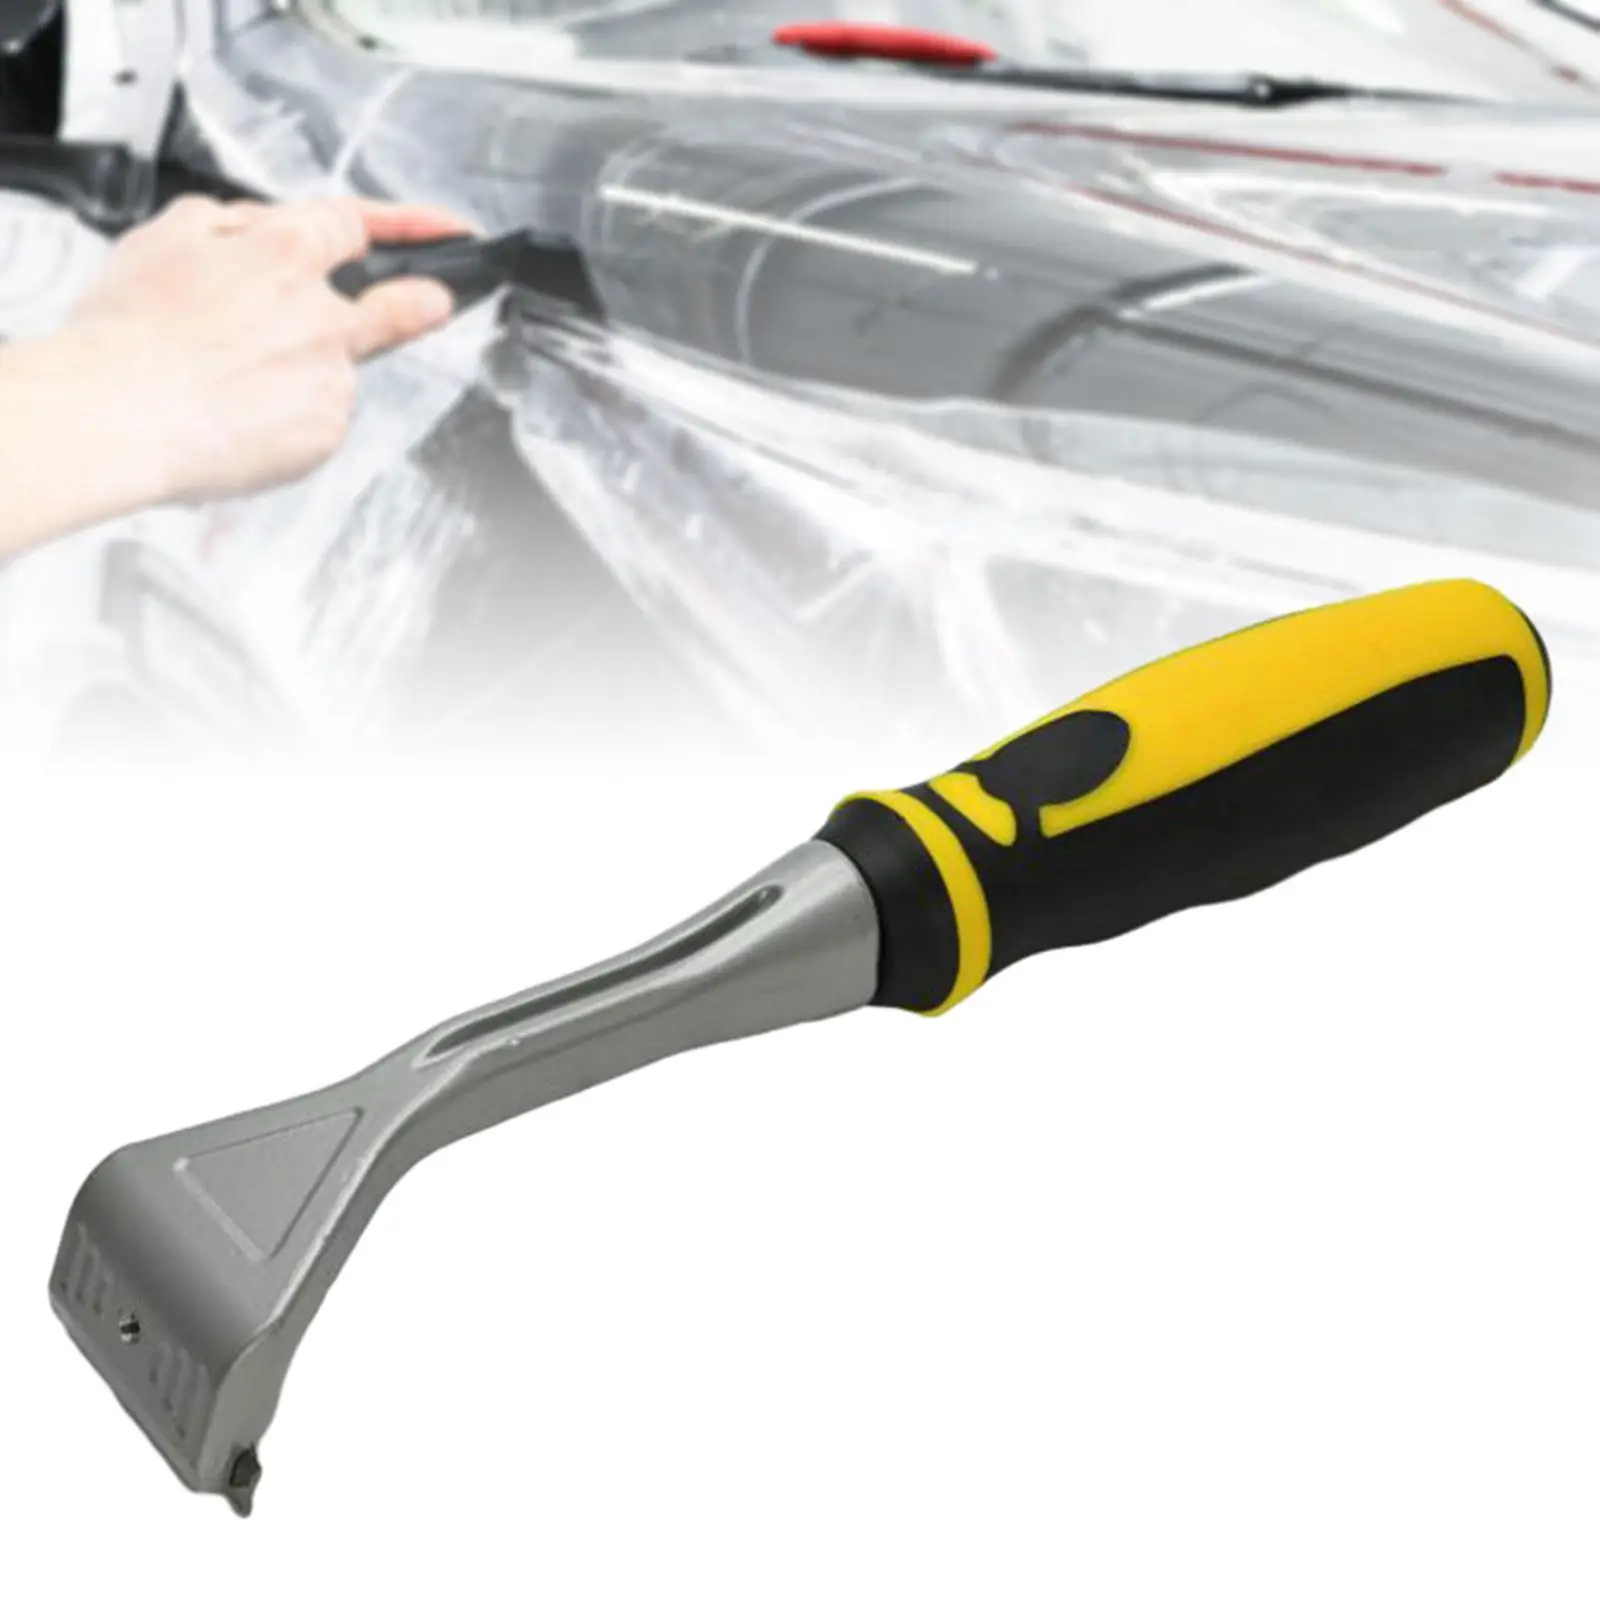 Blade Cleaning Tool Paint Removal Tool 10x2inch Comfortable Grip Versatile Putty Knife for Windshield, Appliance, Glass Sturdy